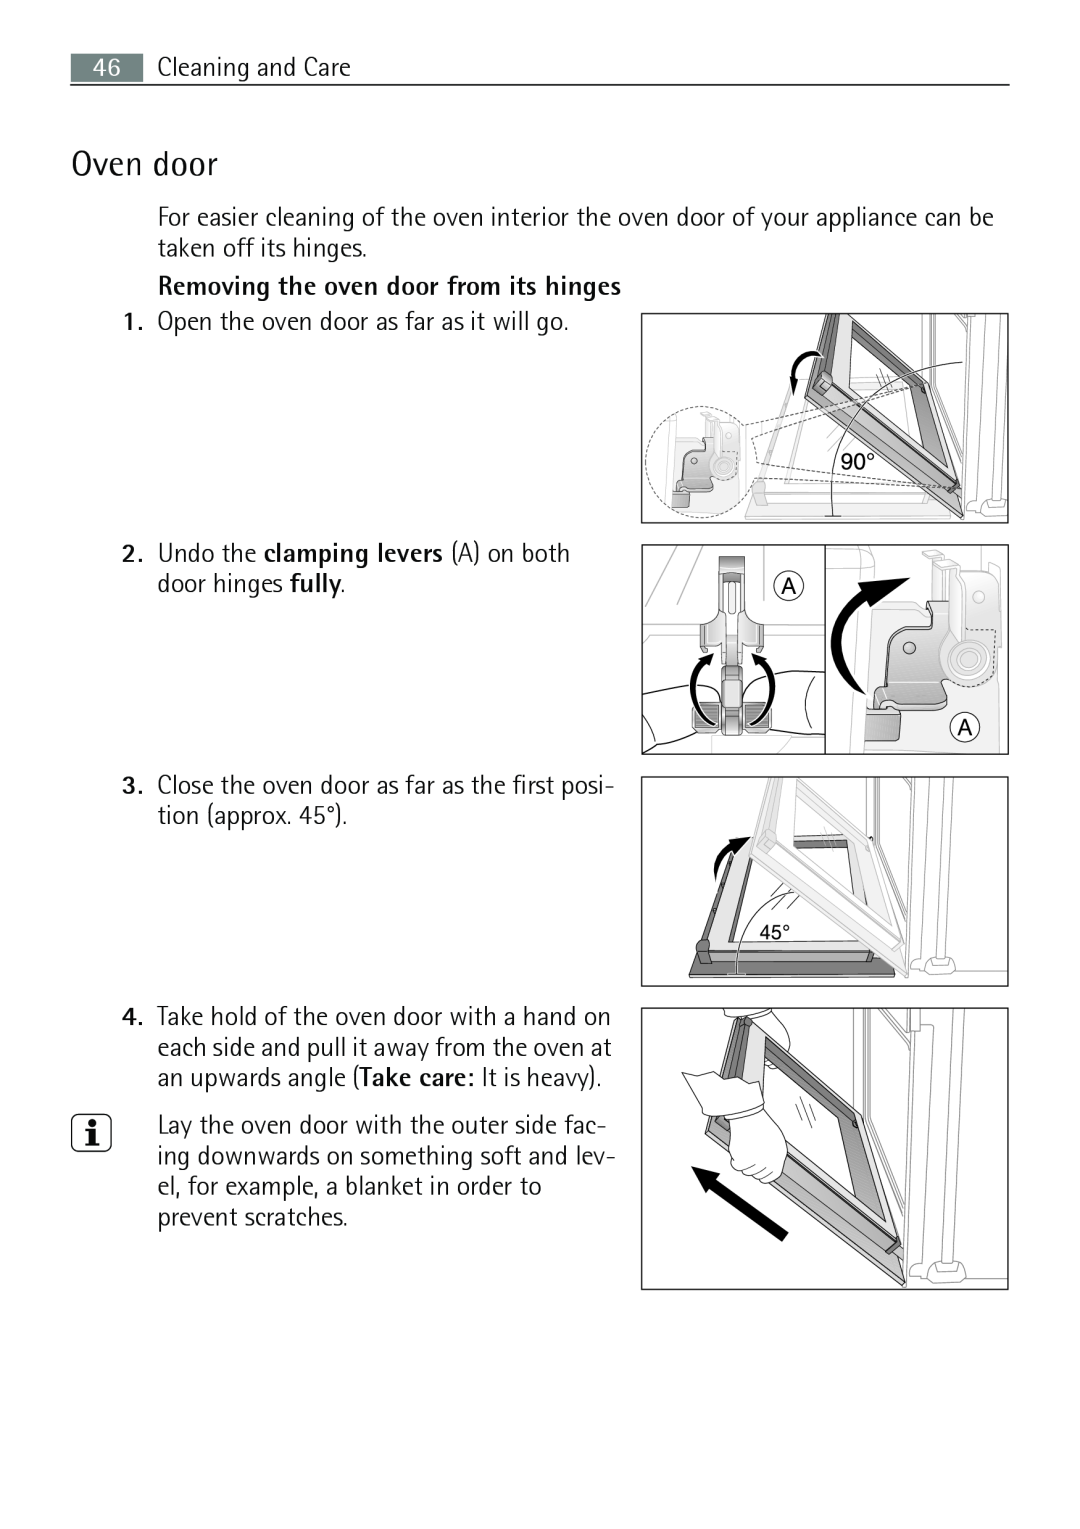 Electrolux E43012-5 user manual Oven door, Removing the oven door from its hinges 